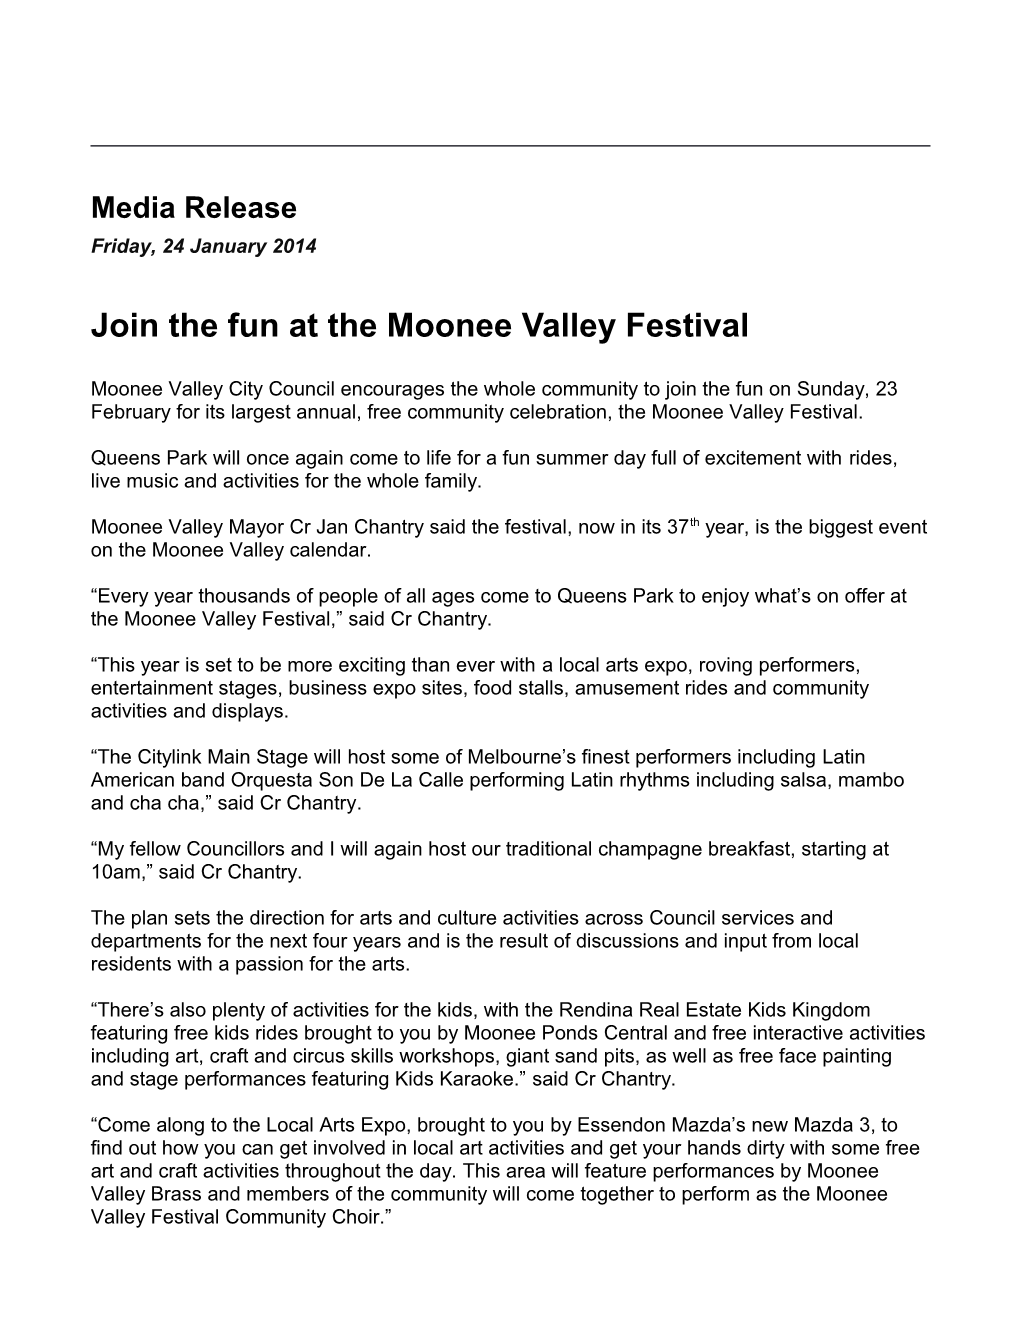 Join the Fun at the Moonee Valley Festival